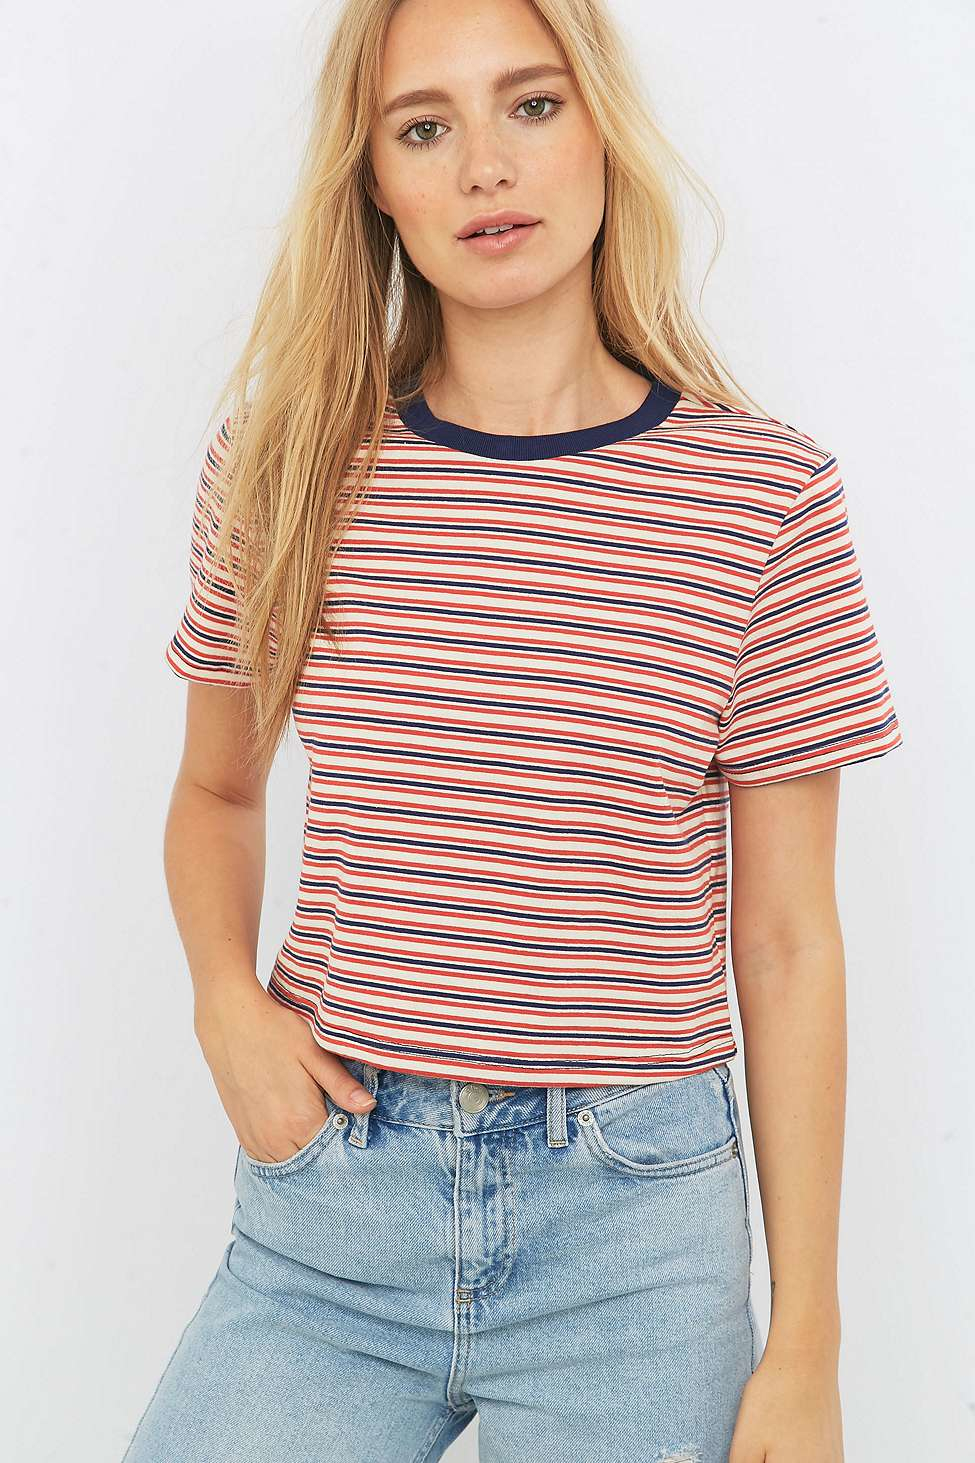 Golf Outfitters: Urban Outfitters Crop Top